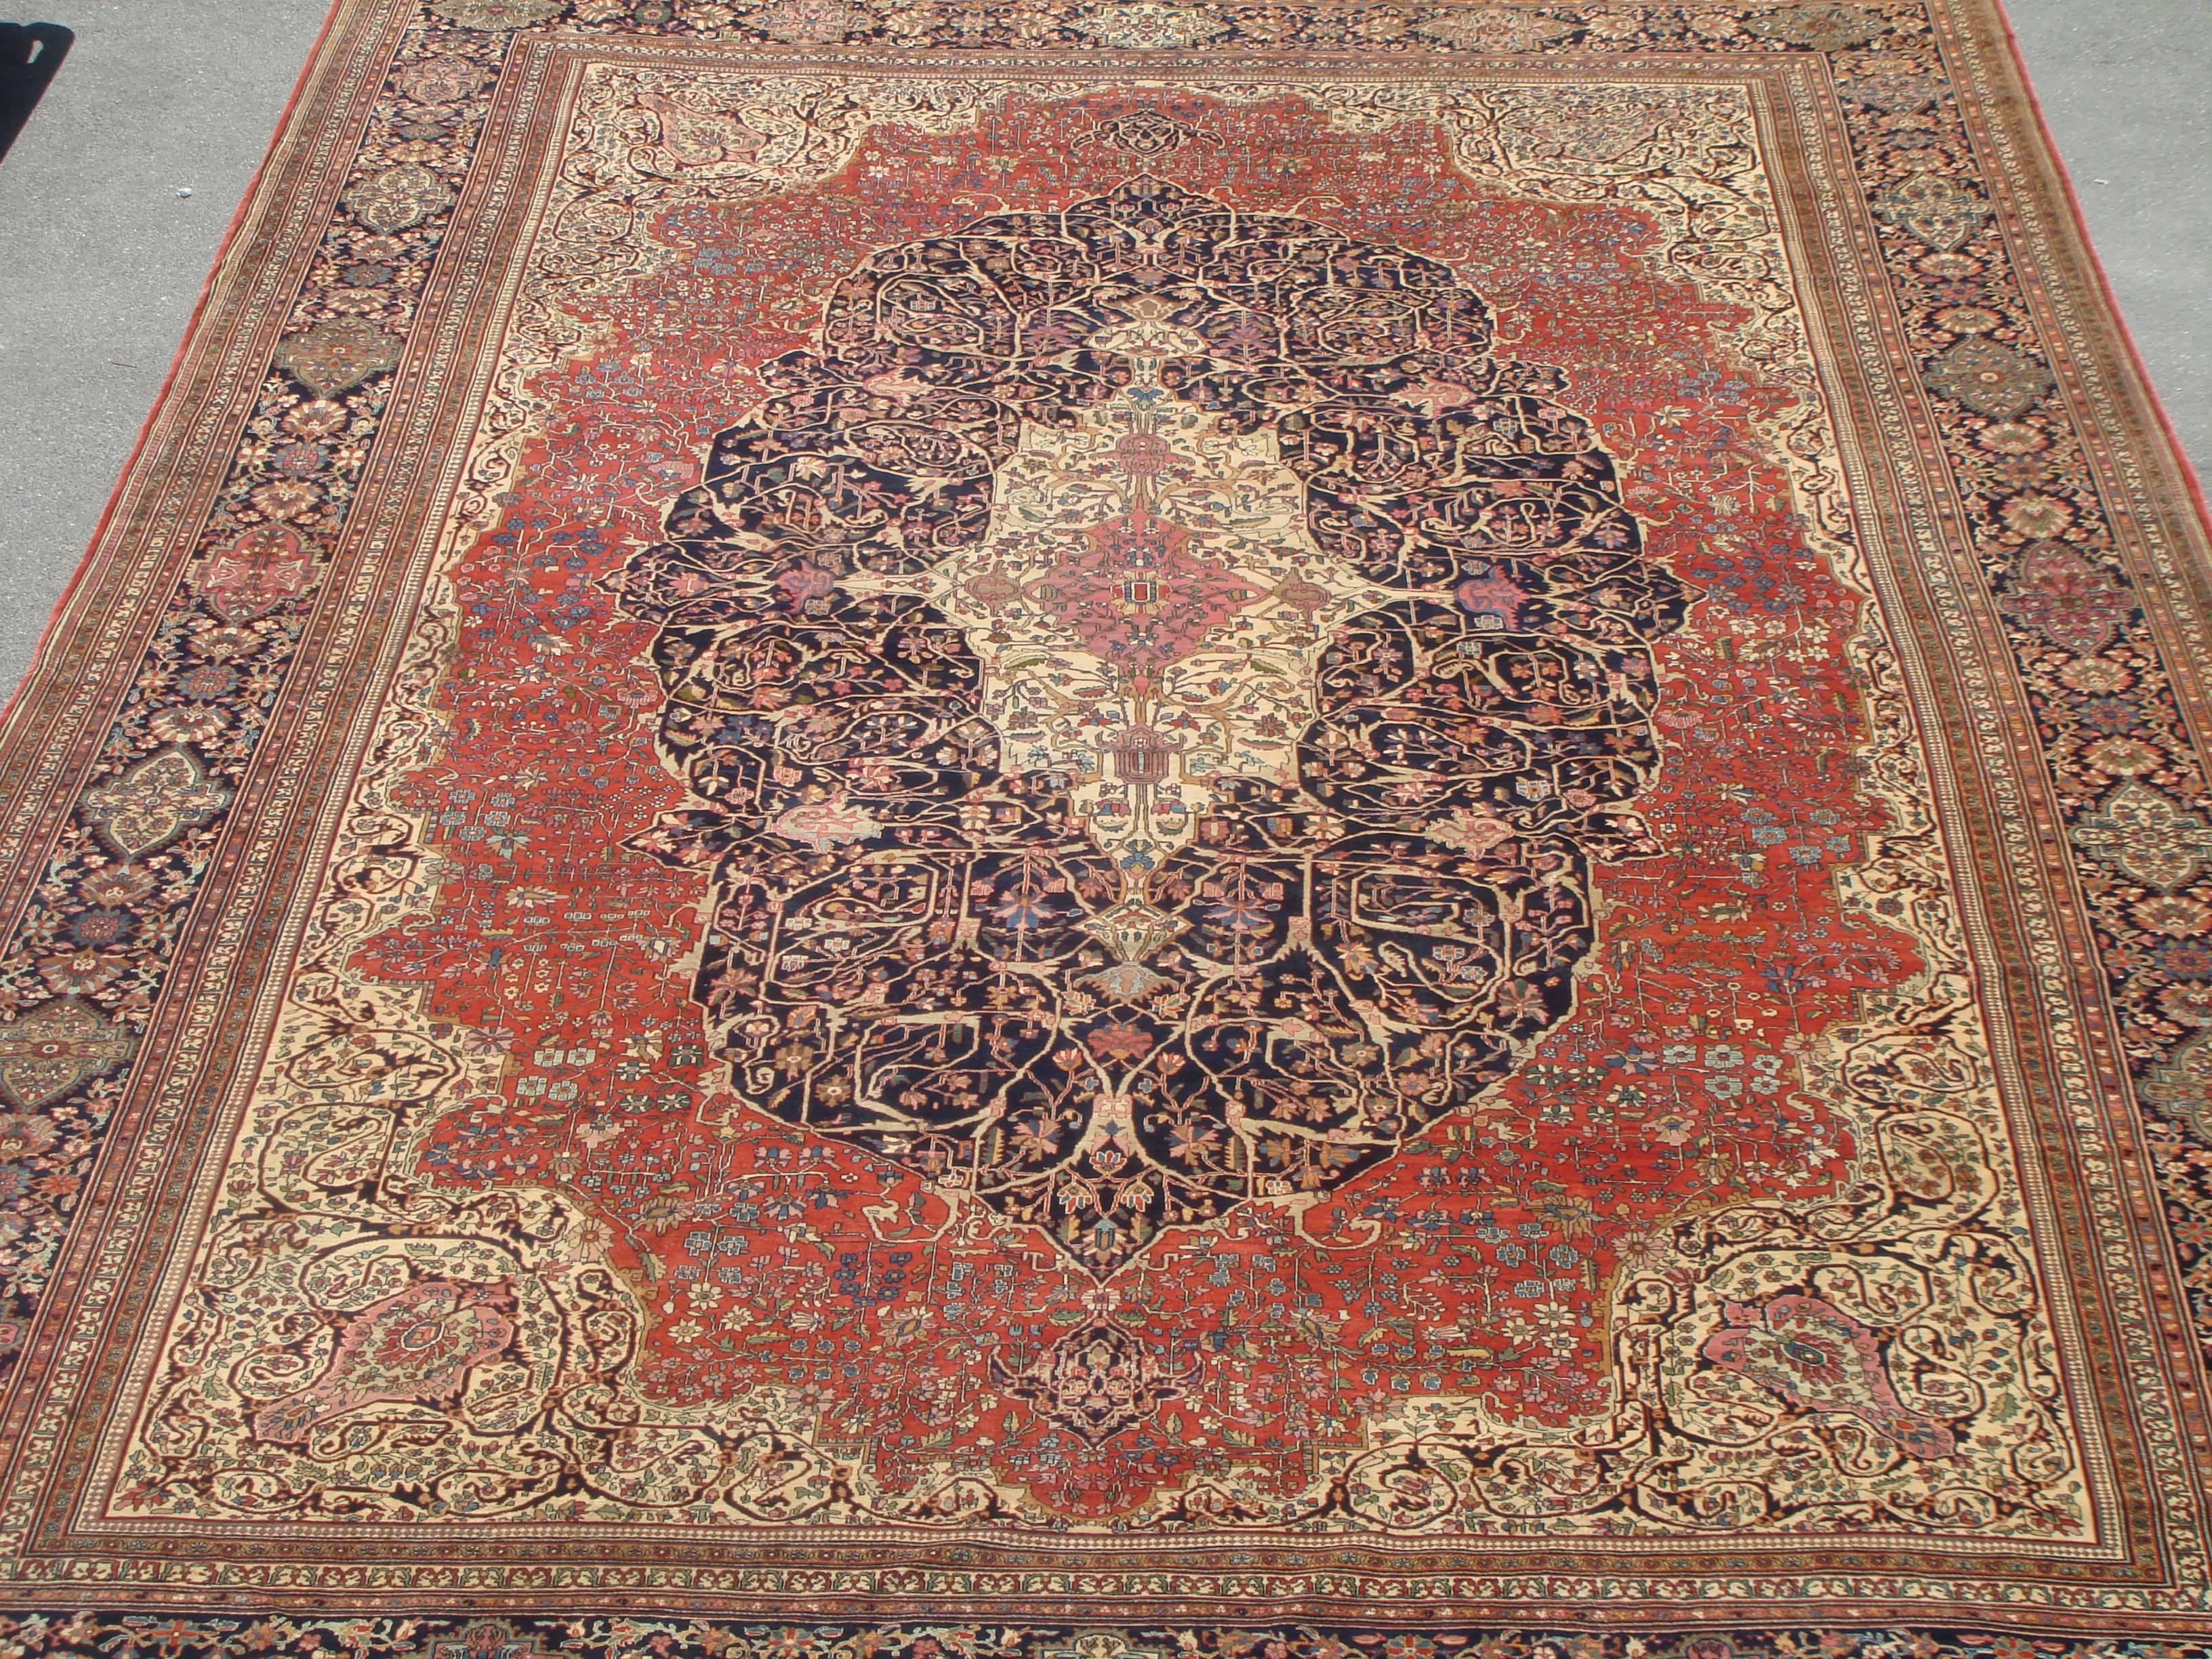 This is a beautiful palace style antique Farahan rug, circa 1880s. This is a beautiful example of a Classic Farahan rug with beautifully stylized center medallion in burned orange rust with smaller medallion in navy blue and an ivory medallion. The